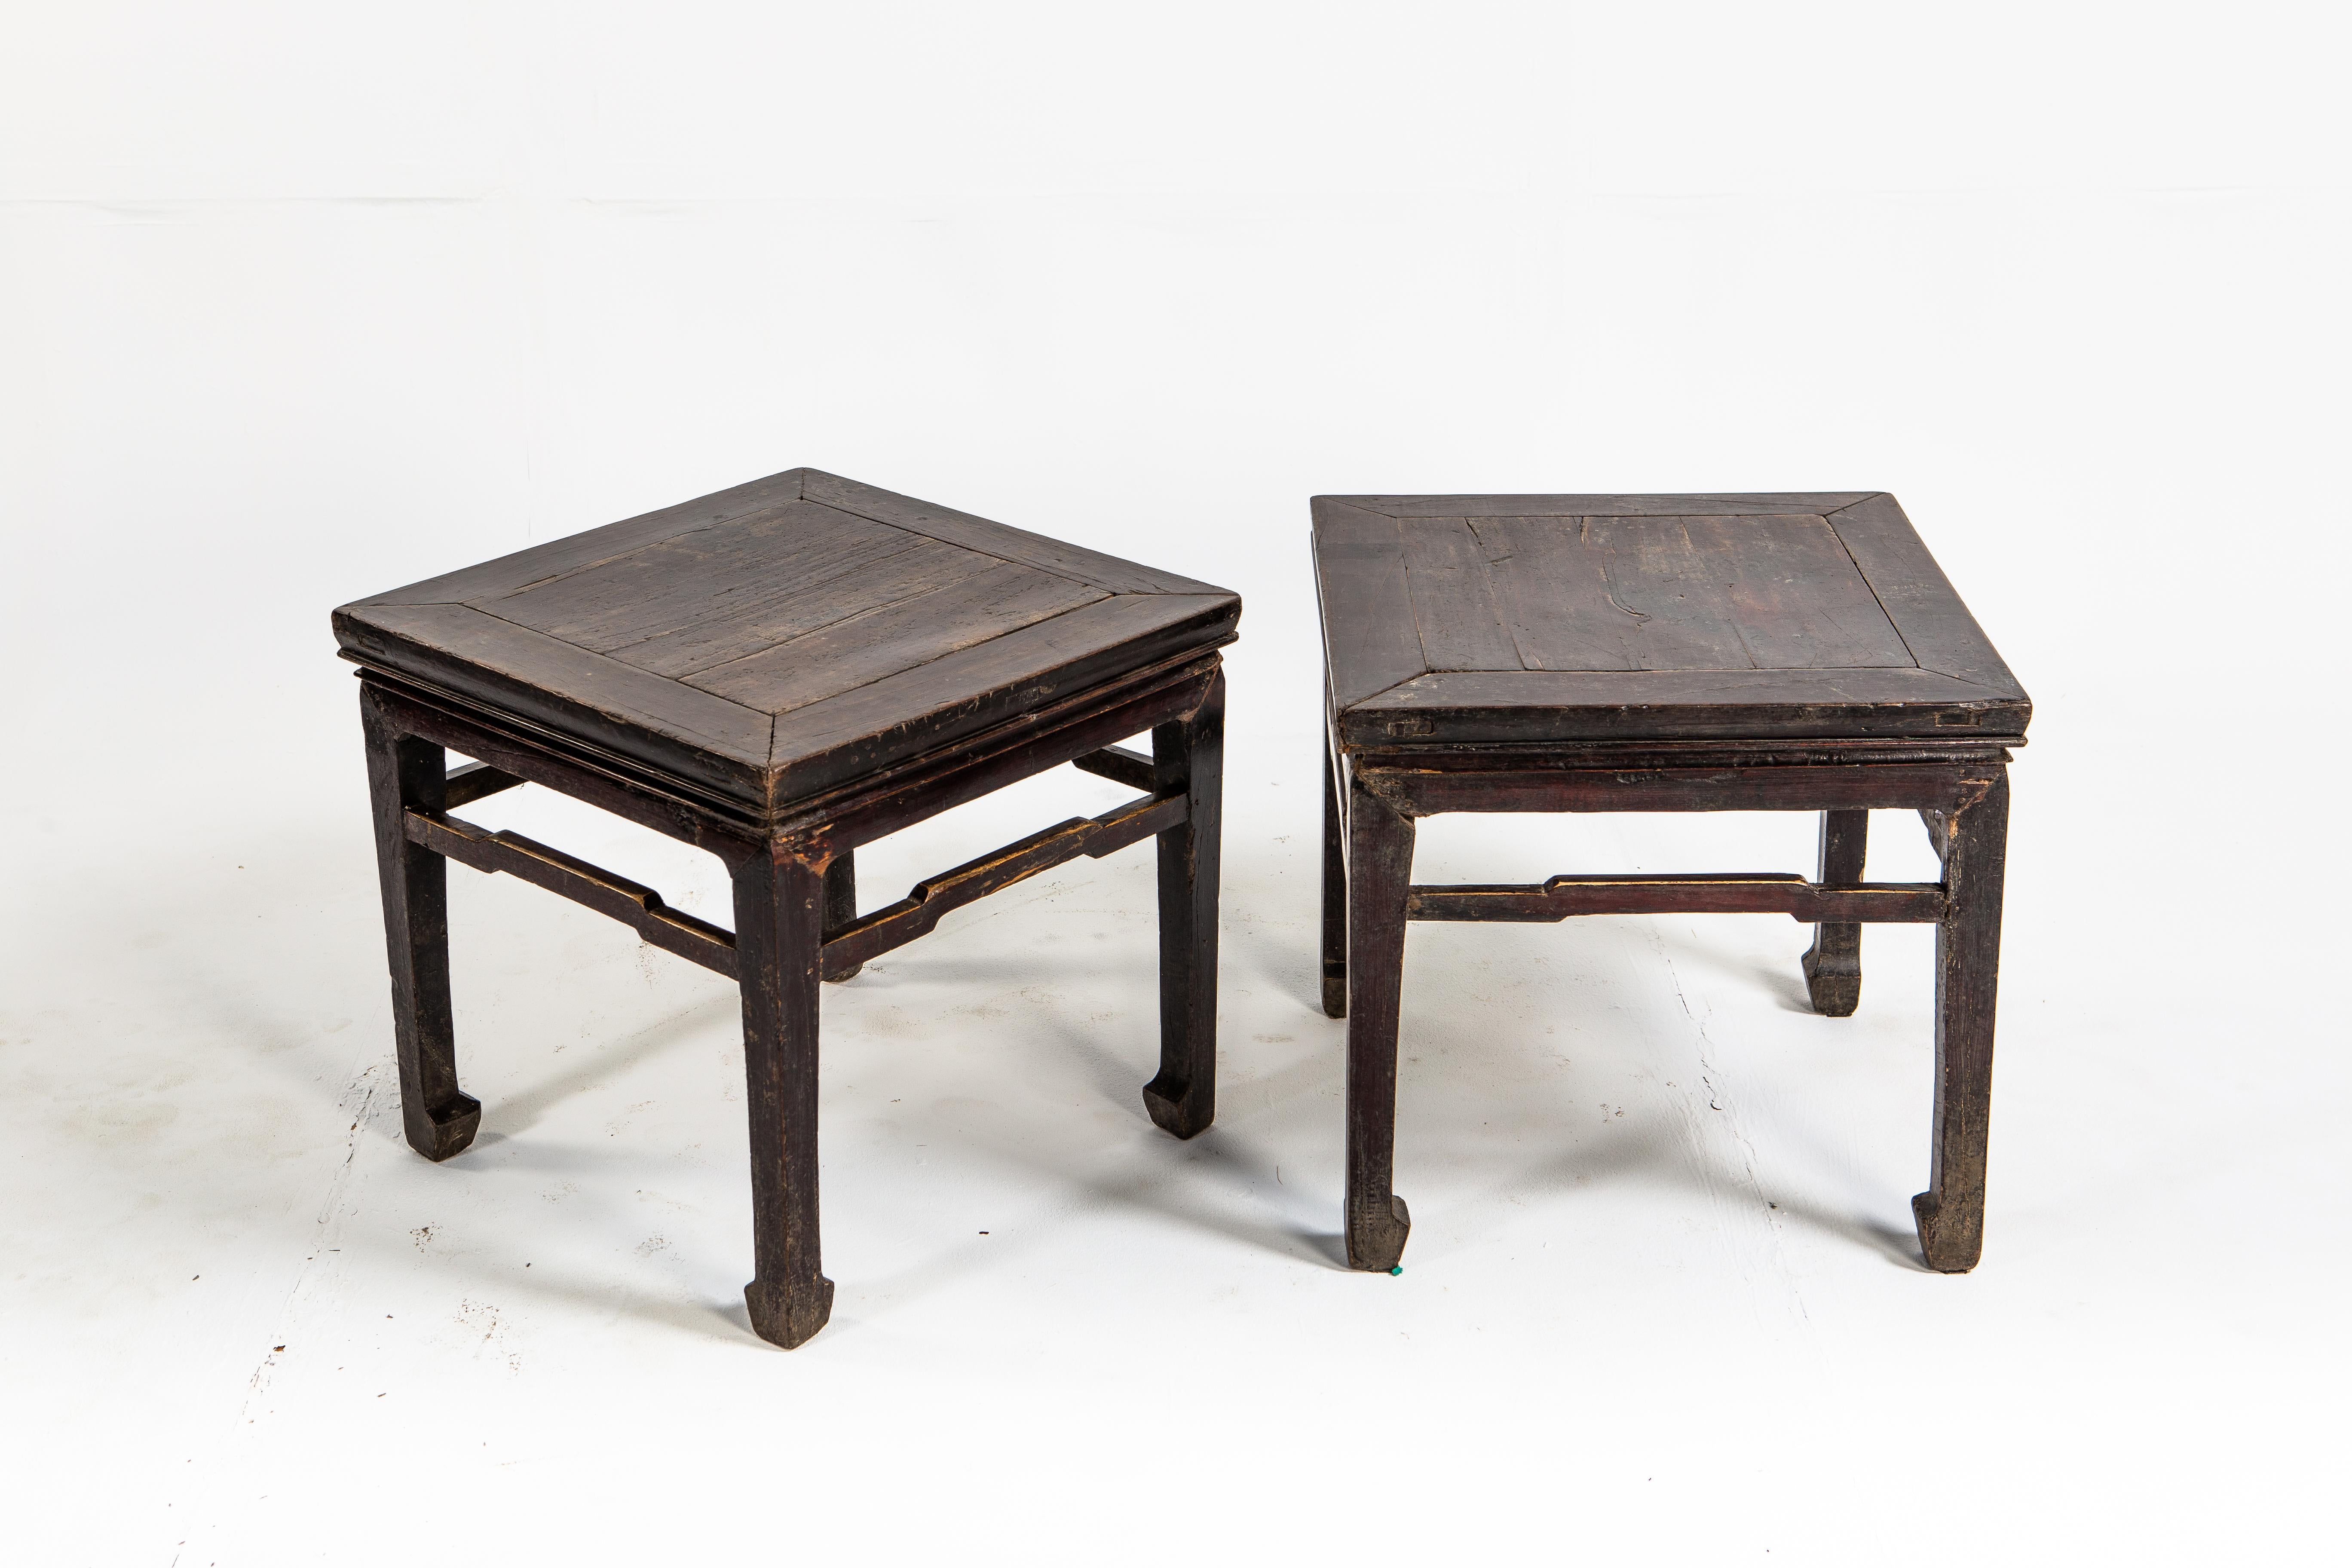 This pair of square-waisted stools are from Shanxi, China and made from elmwood The stools feature humpback stretchers and horse hoof legs. Dating back to the late Qing dynasty the stools were once covered in ox blood lacquer.